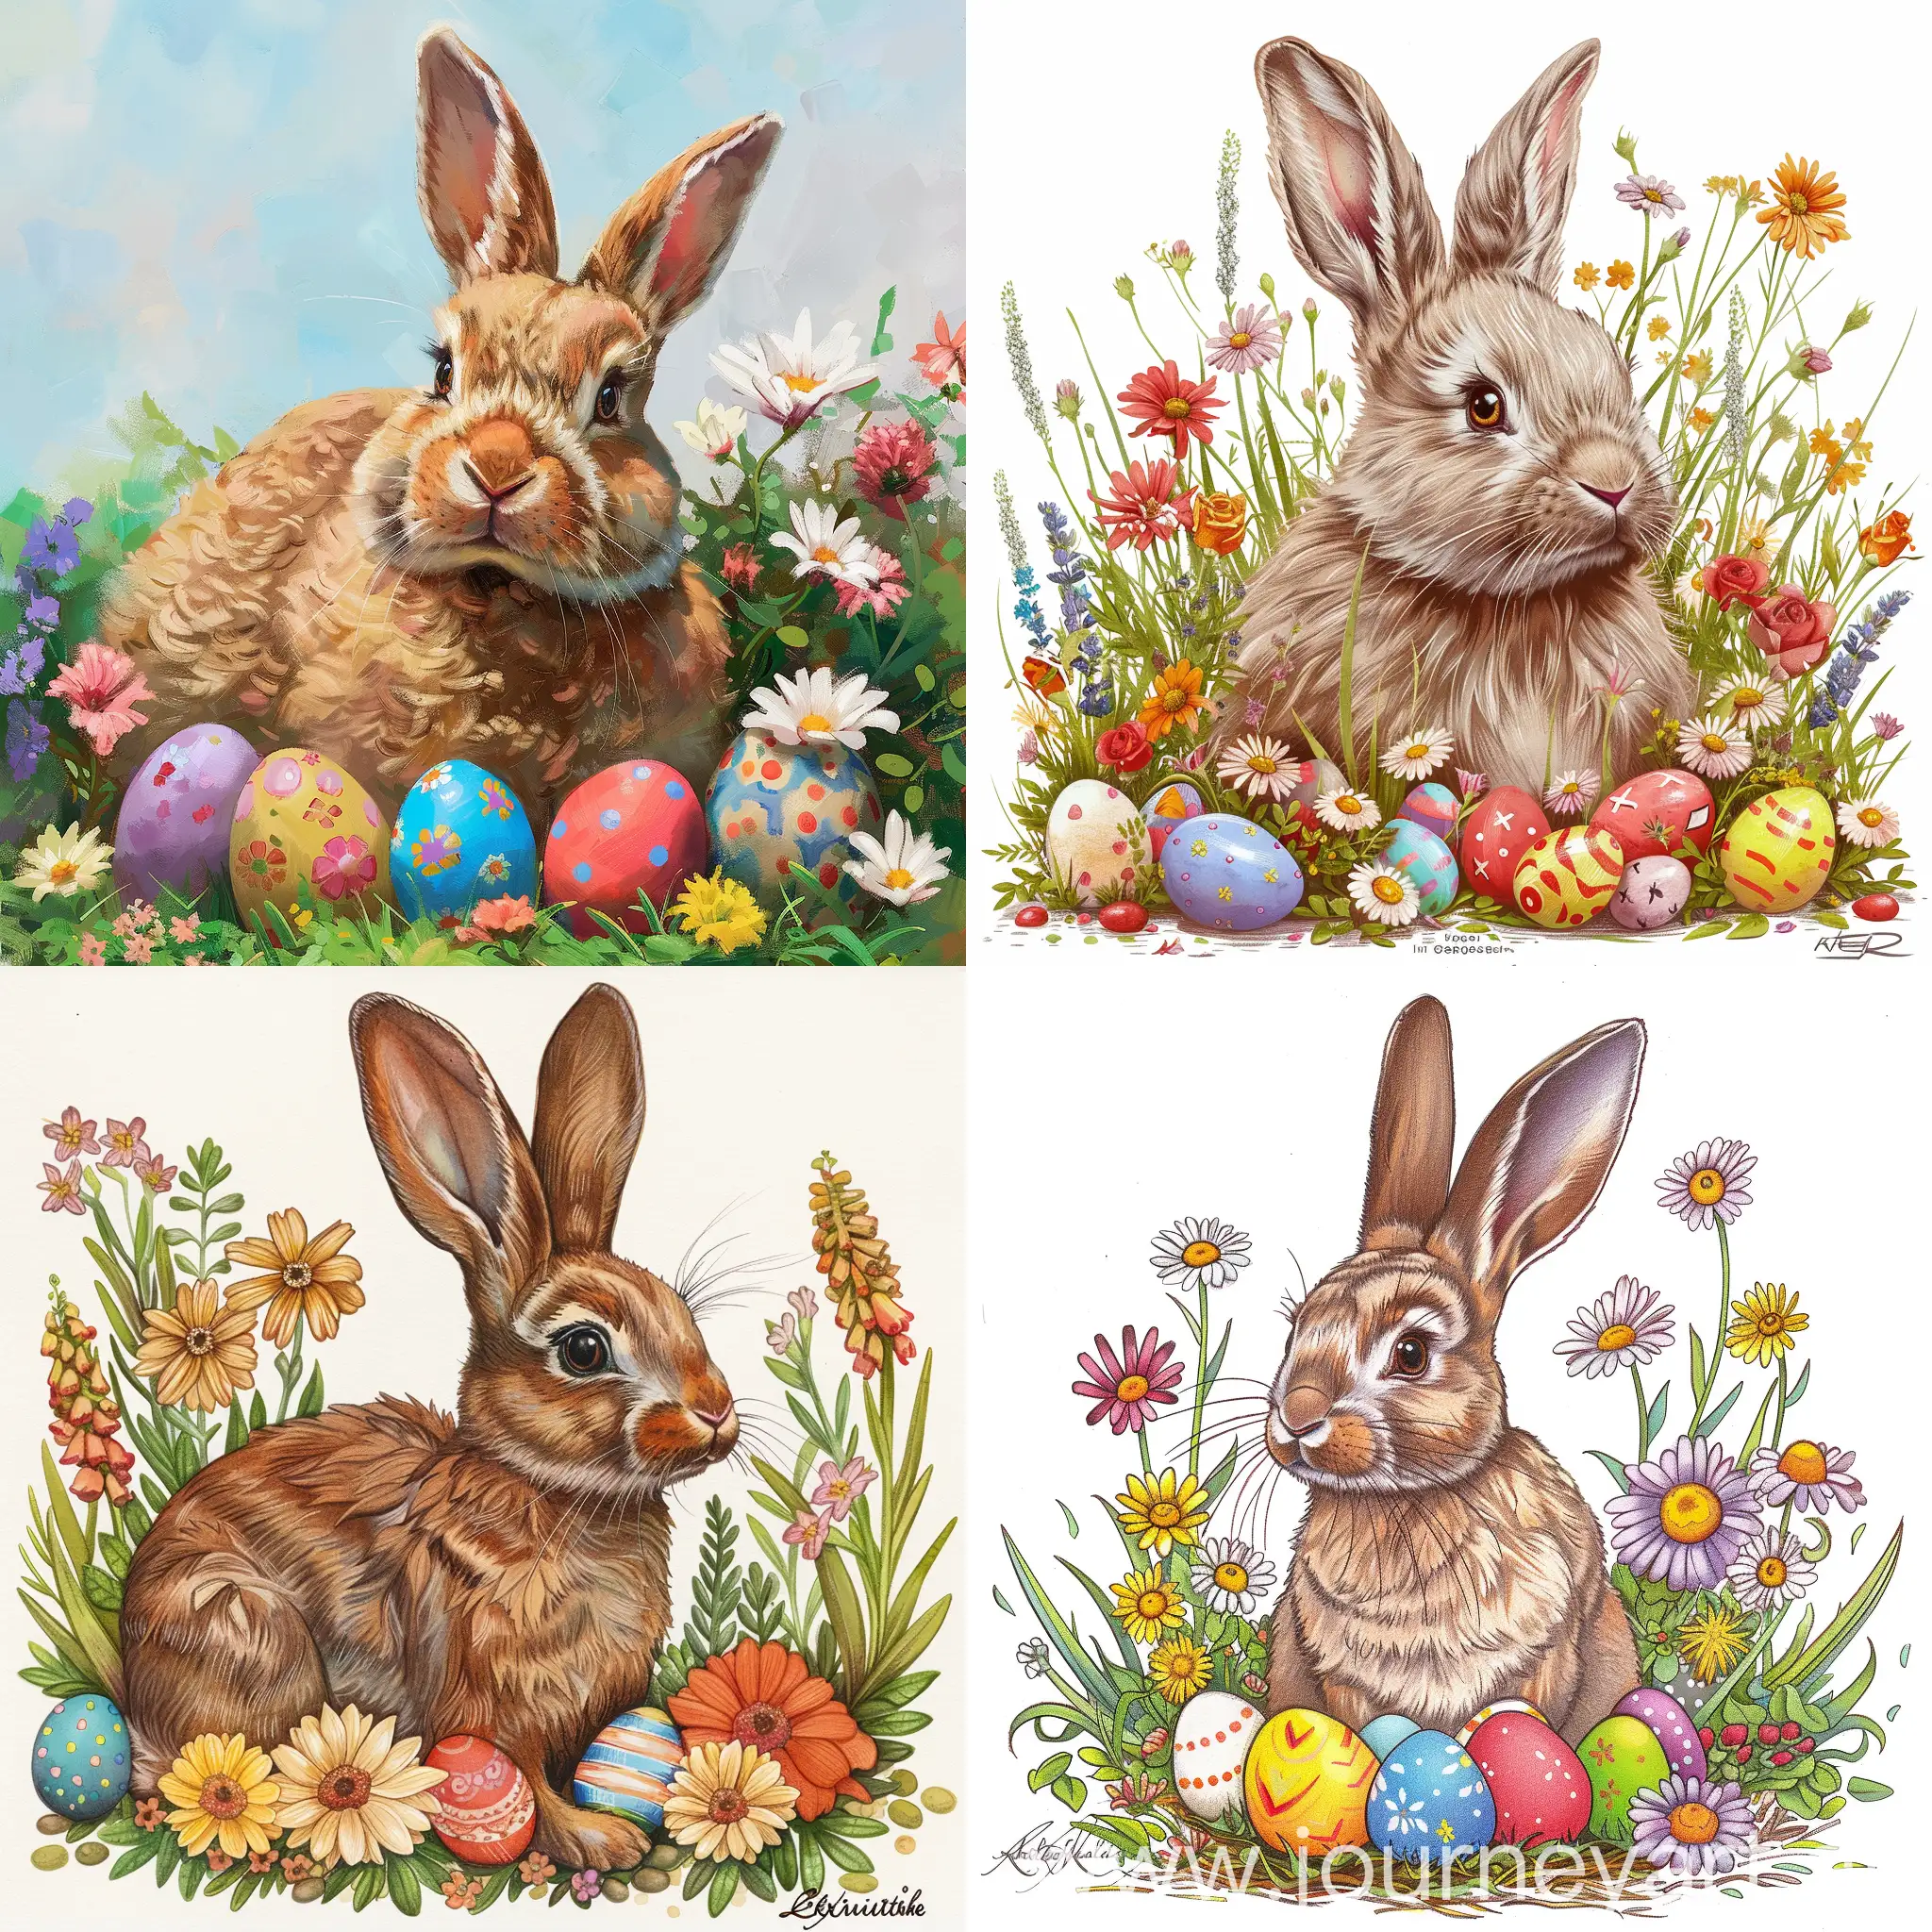 Easter bunny with colorful eggs near and flowers around, clipart, high quality details, by Erik Nitsche style